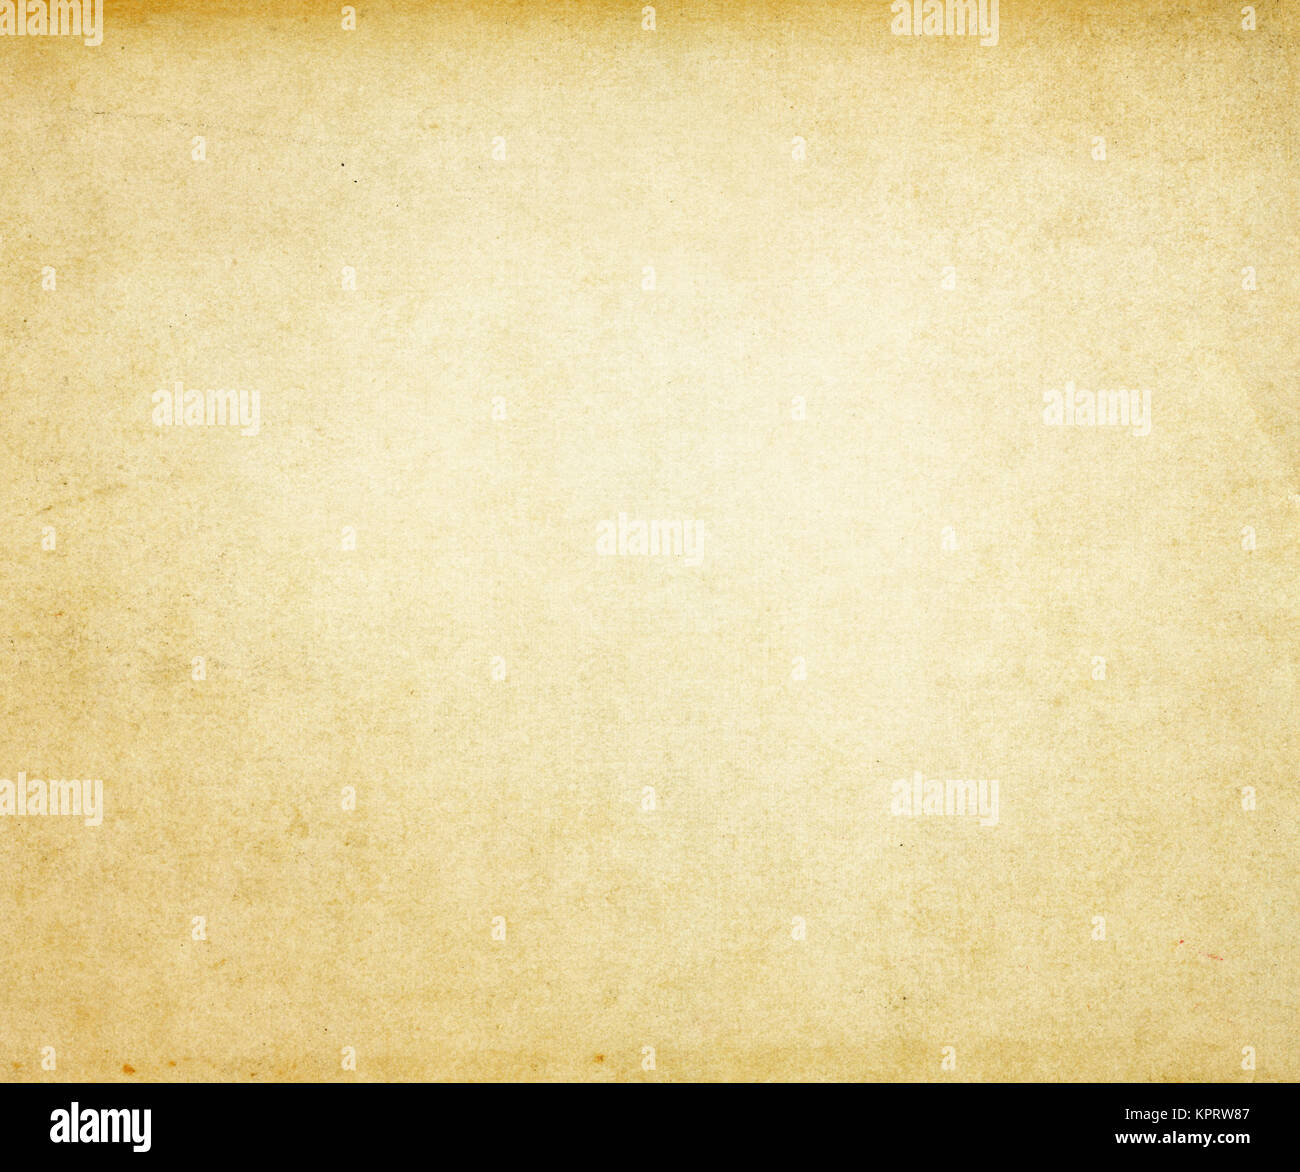 Aging paper background. Natural old paper texture for the design. Stock Photo